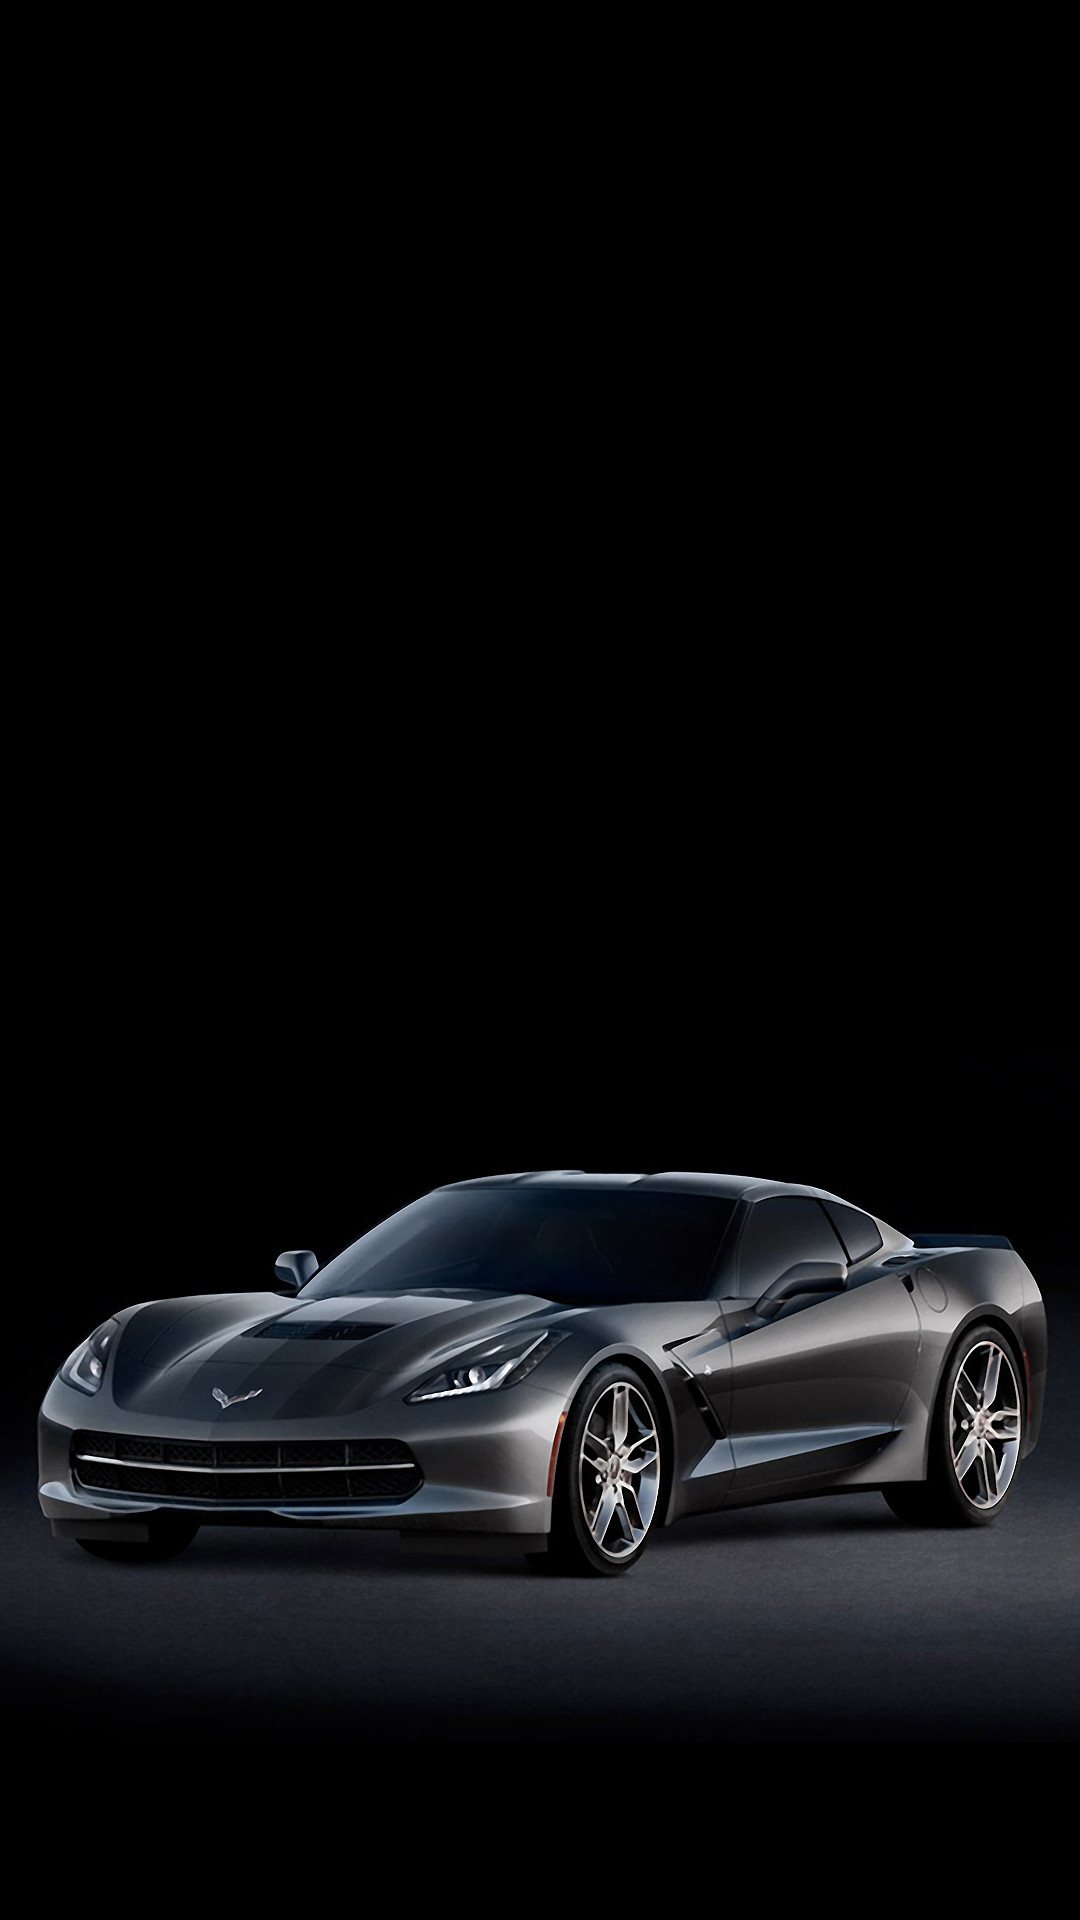 1080x1920 Corvette Stingray Side iPhone 6 Wallpaper Download iPhone Wallpapers  